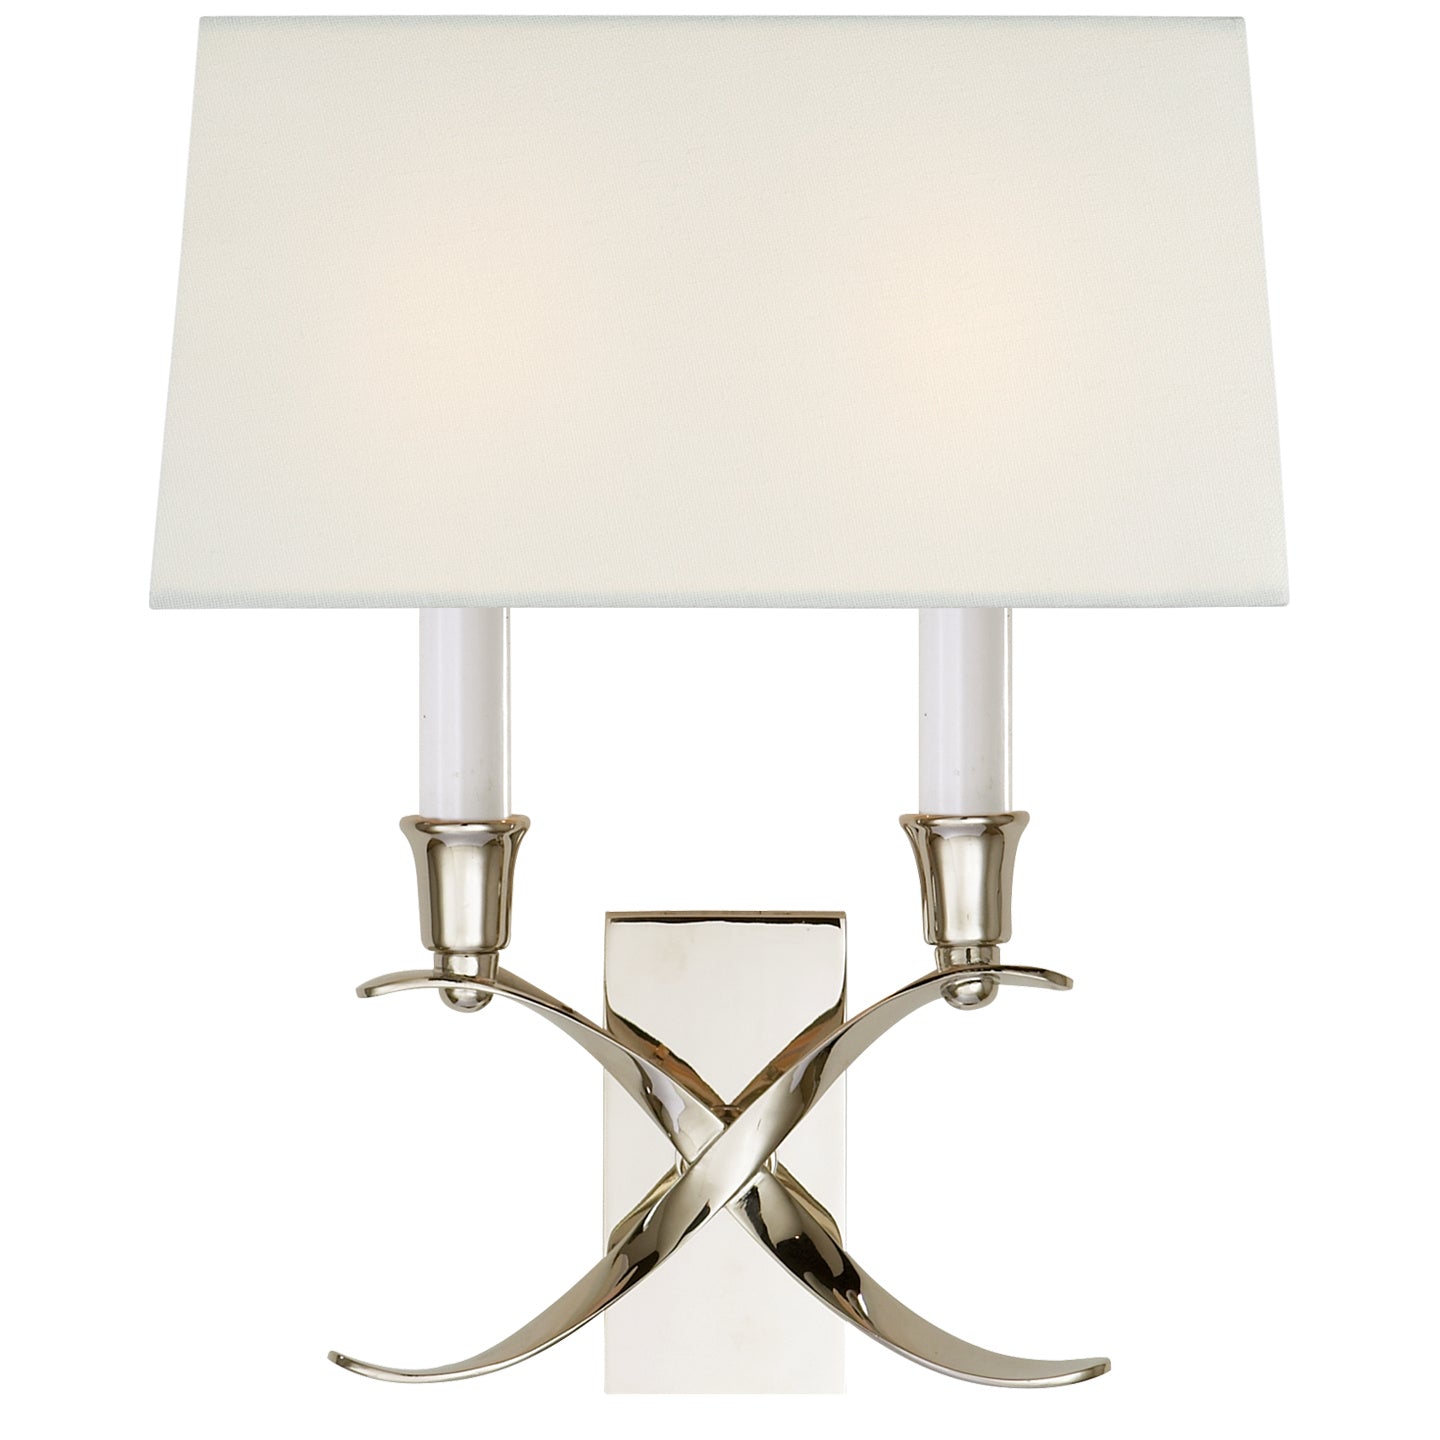 Visual Comfort Signature - CHD 1190PN-L - Two Light Wall Sconce - Cross Bouillotte - Polished Nickel